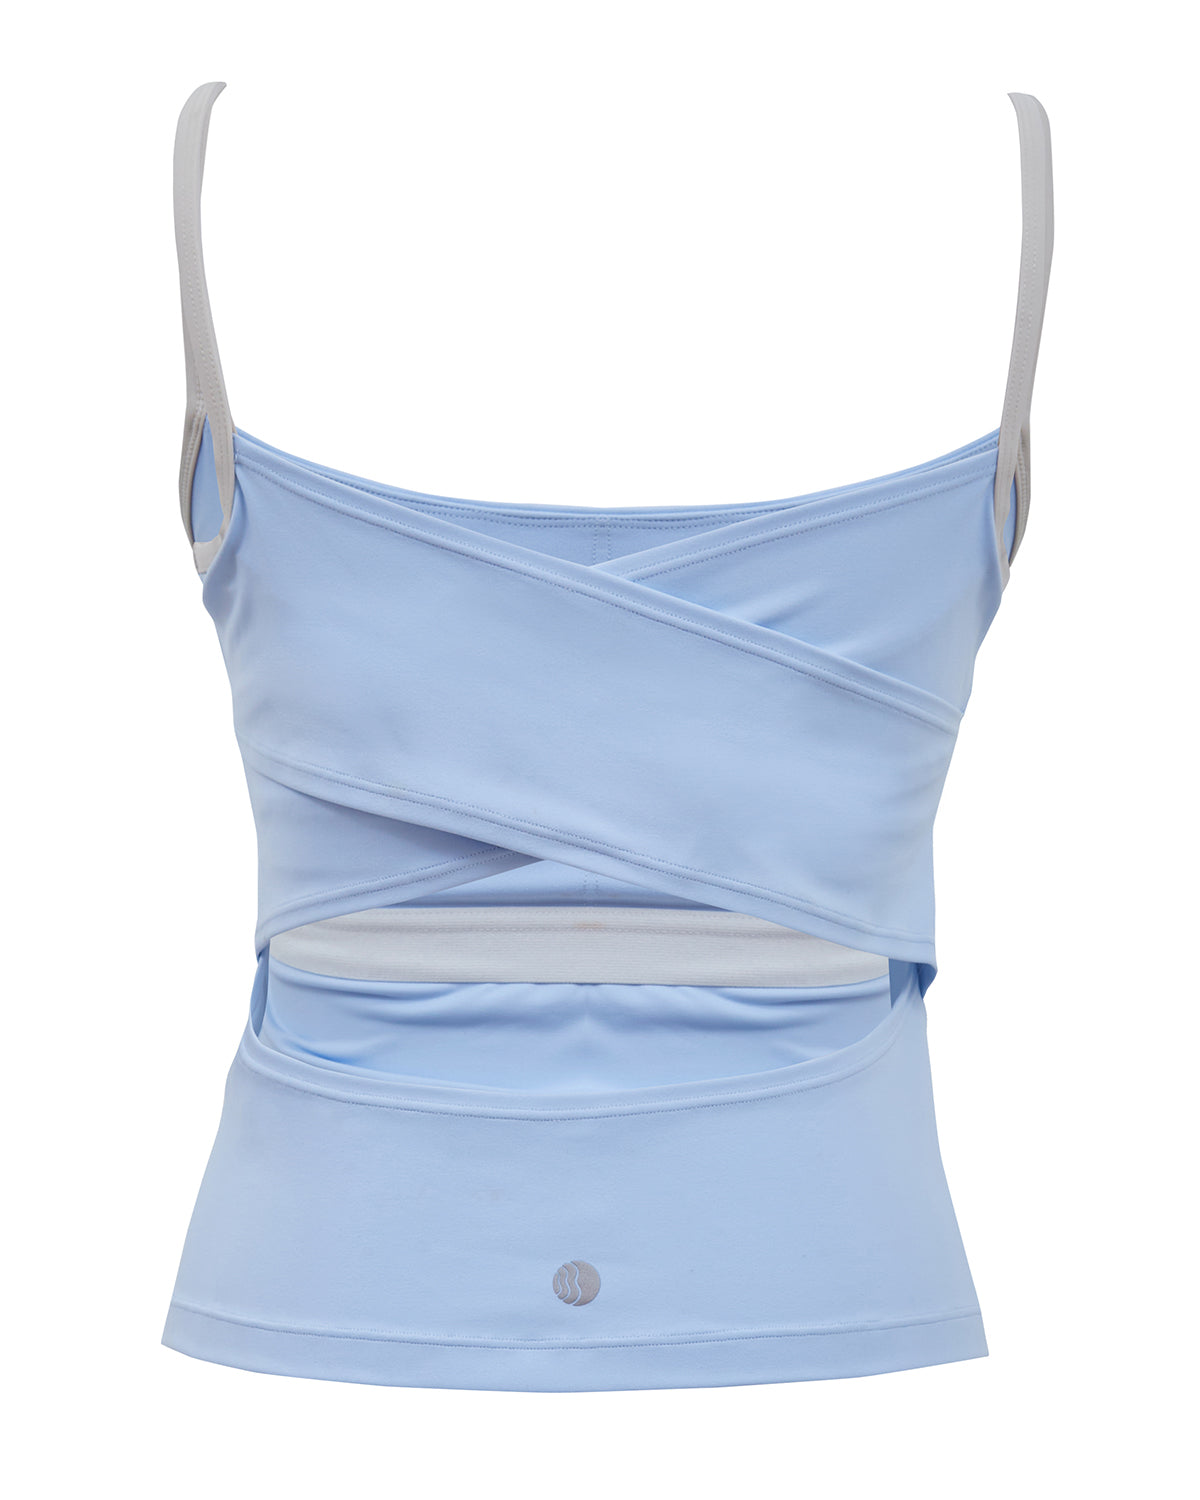 Attract Bra Top in Baby Blue